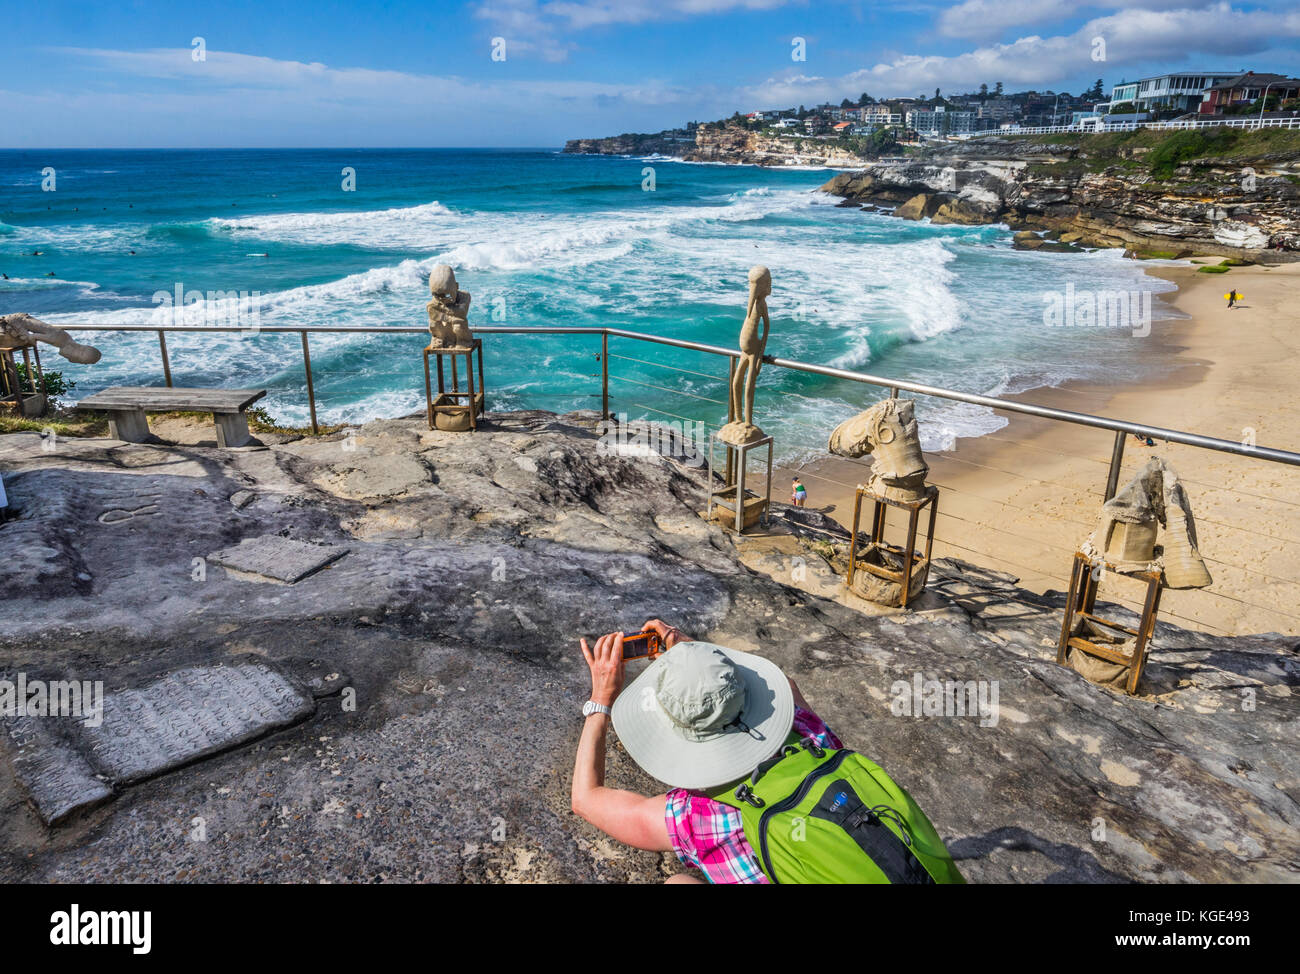 Sculpture by the sea 2017, annual exhibition on the coastal walk between Bondi and Tamara Beach, Sydney, New South Wales, Australia. Sculpture install Stock Photo